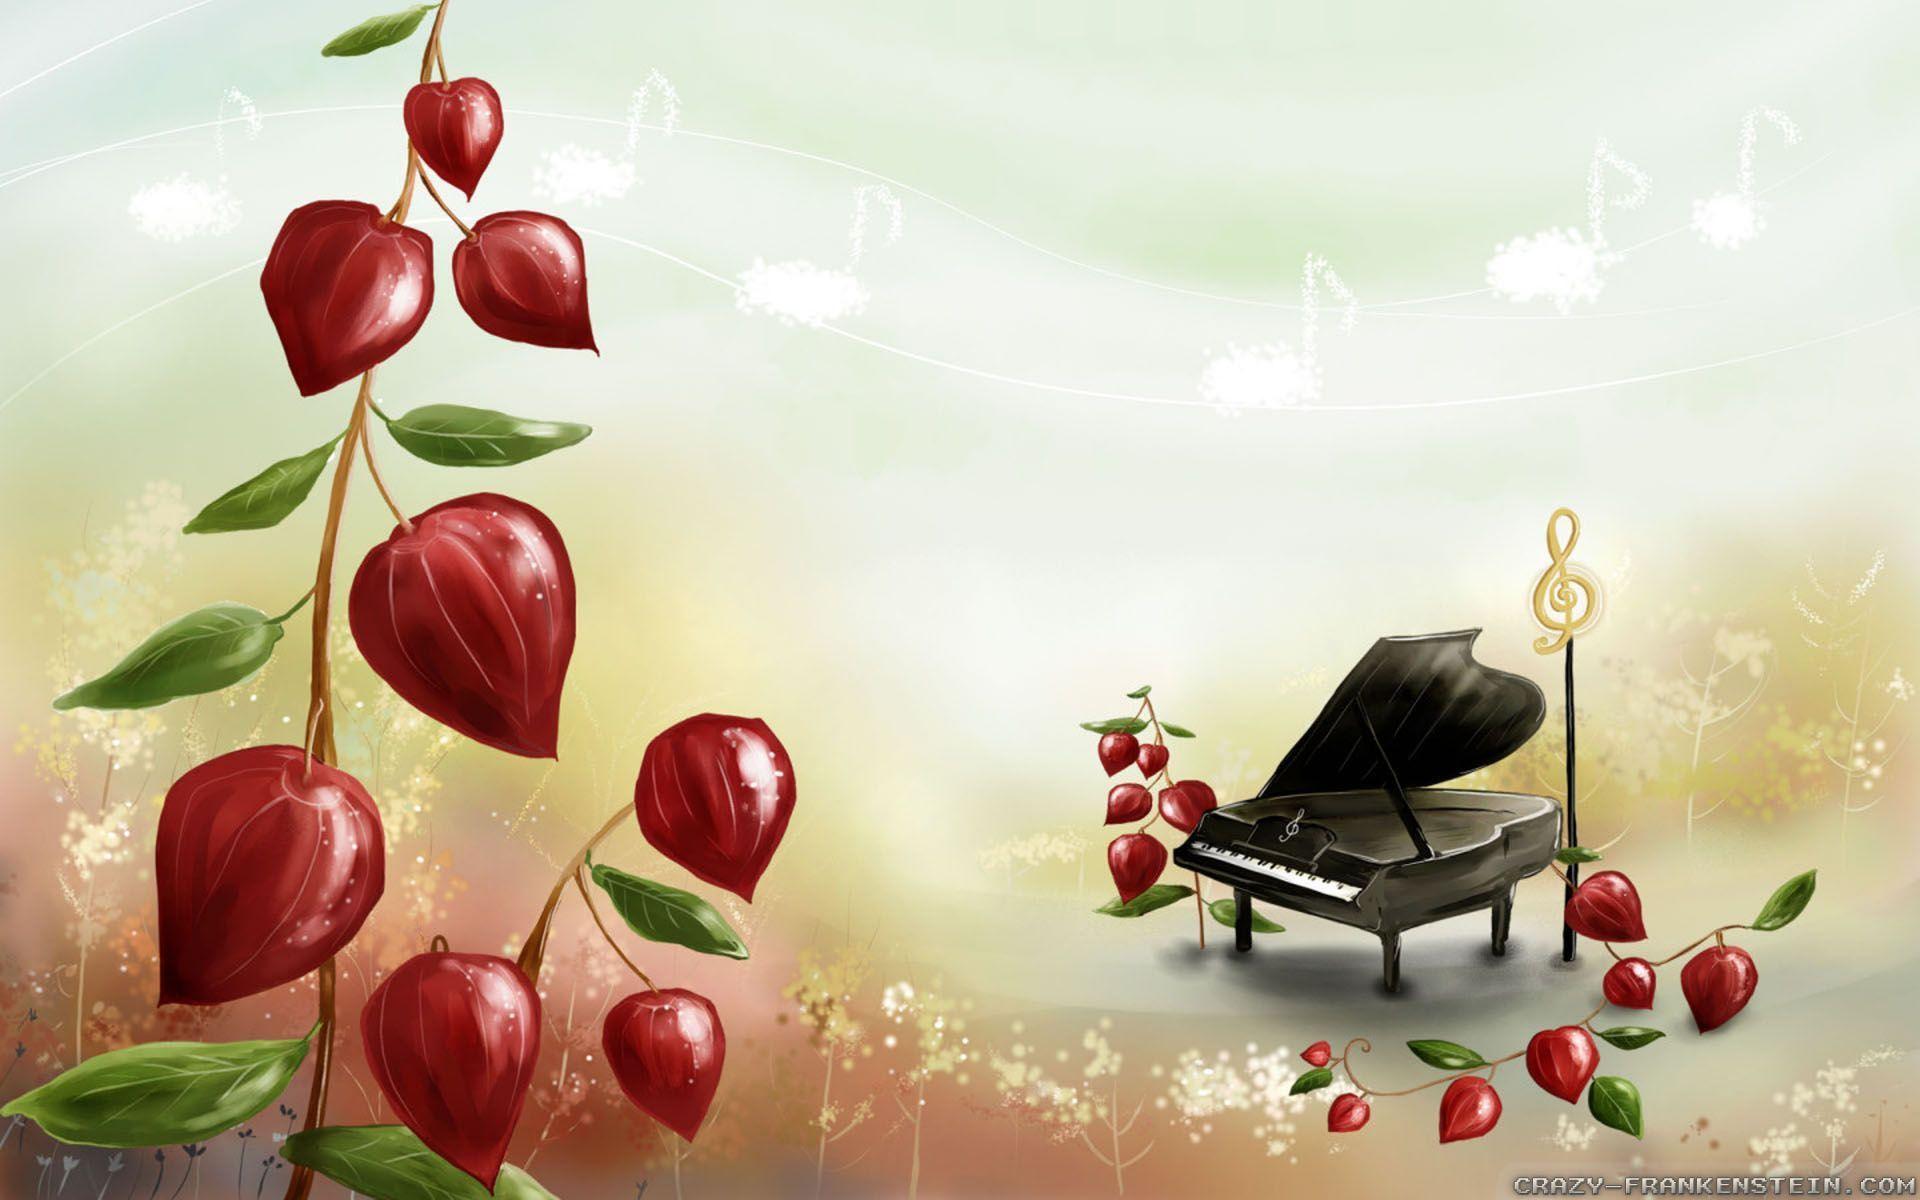 Piano Music Notes Wallpaper HD Wallpaper In 1920x1200PX